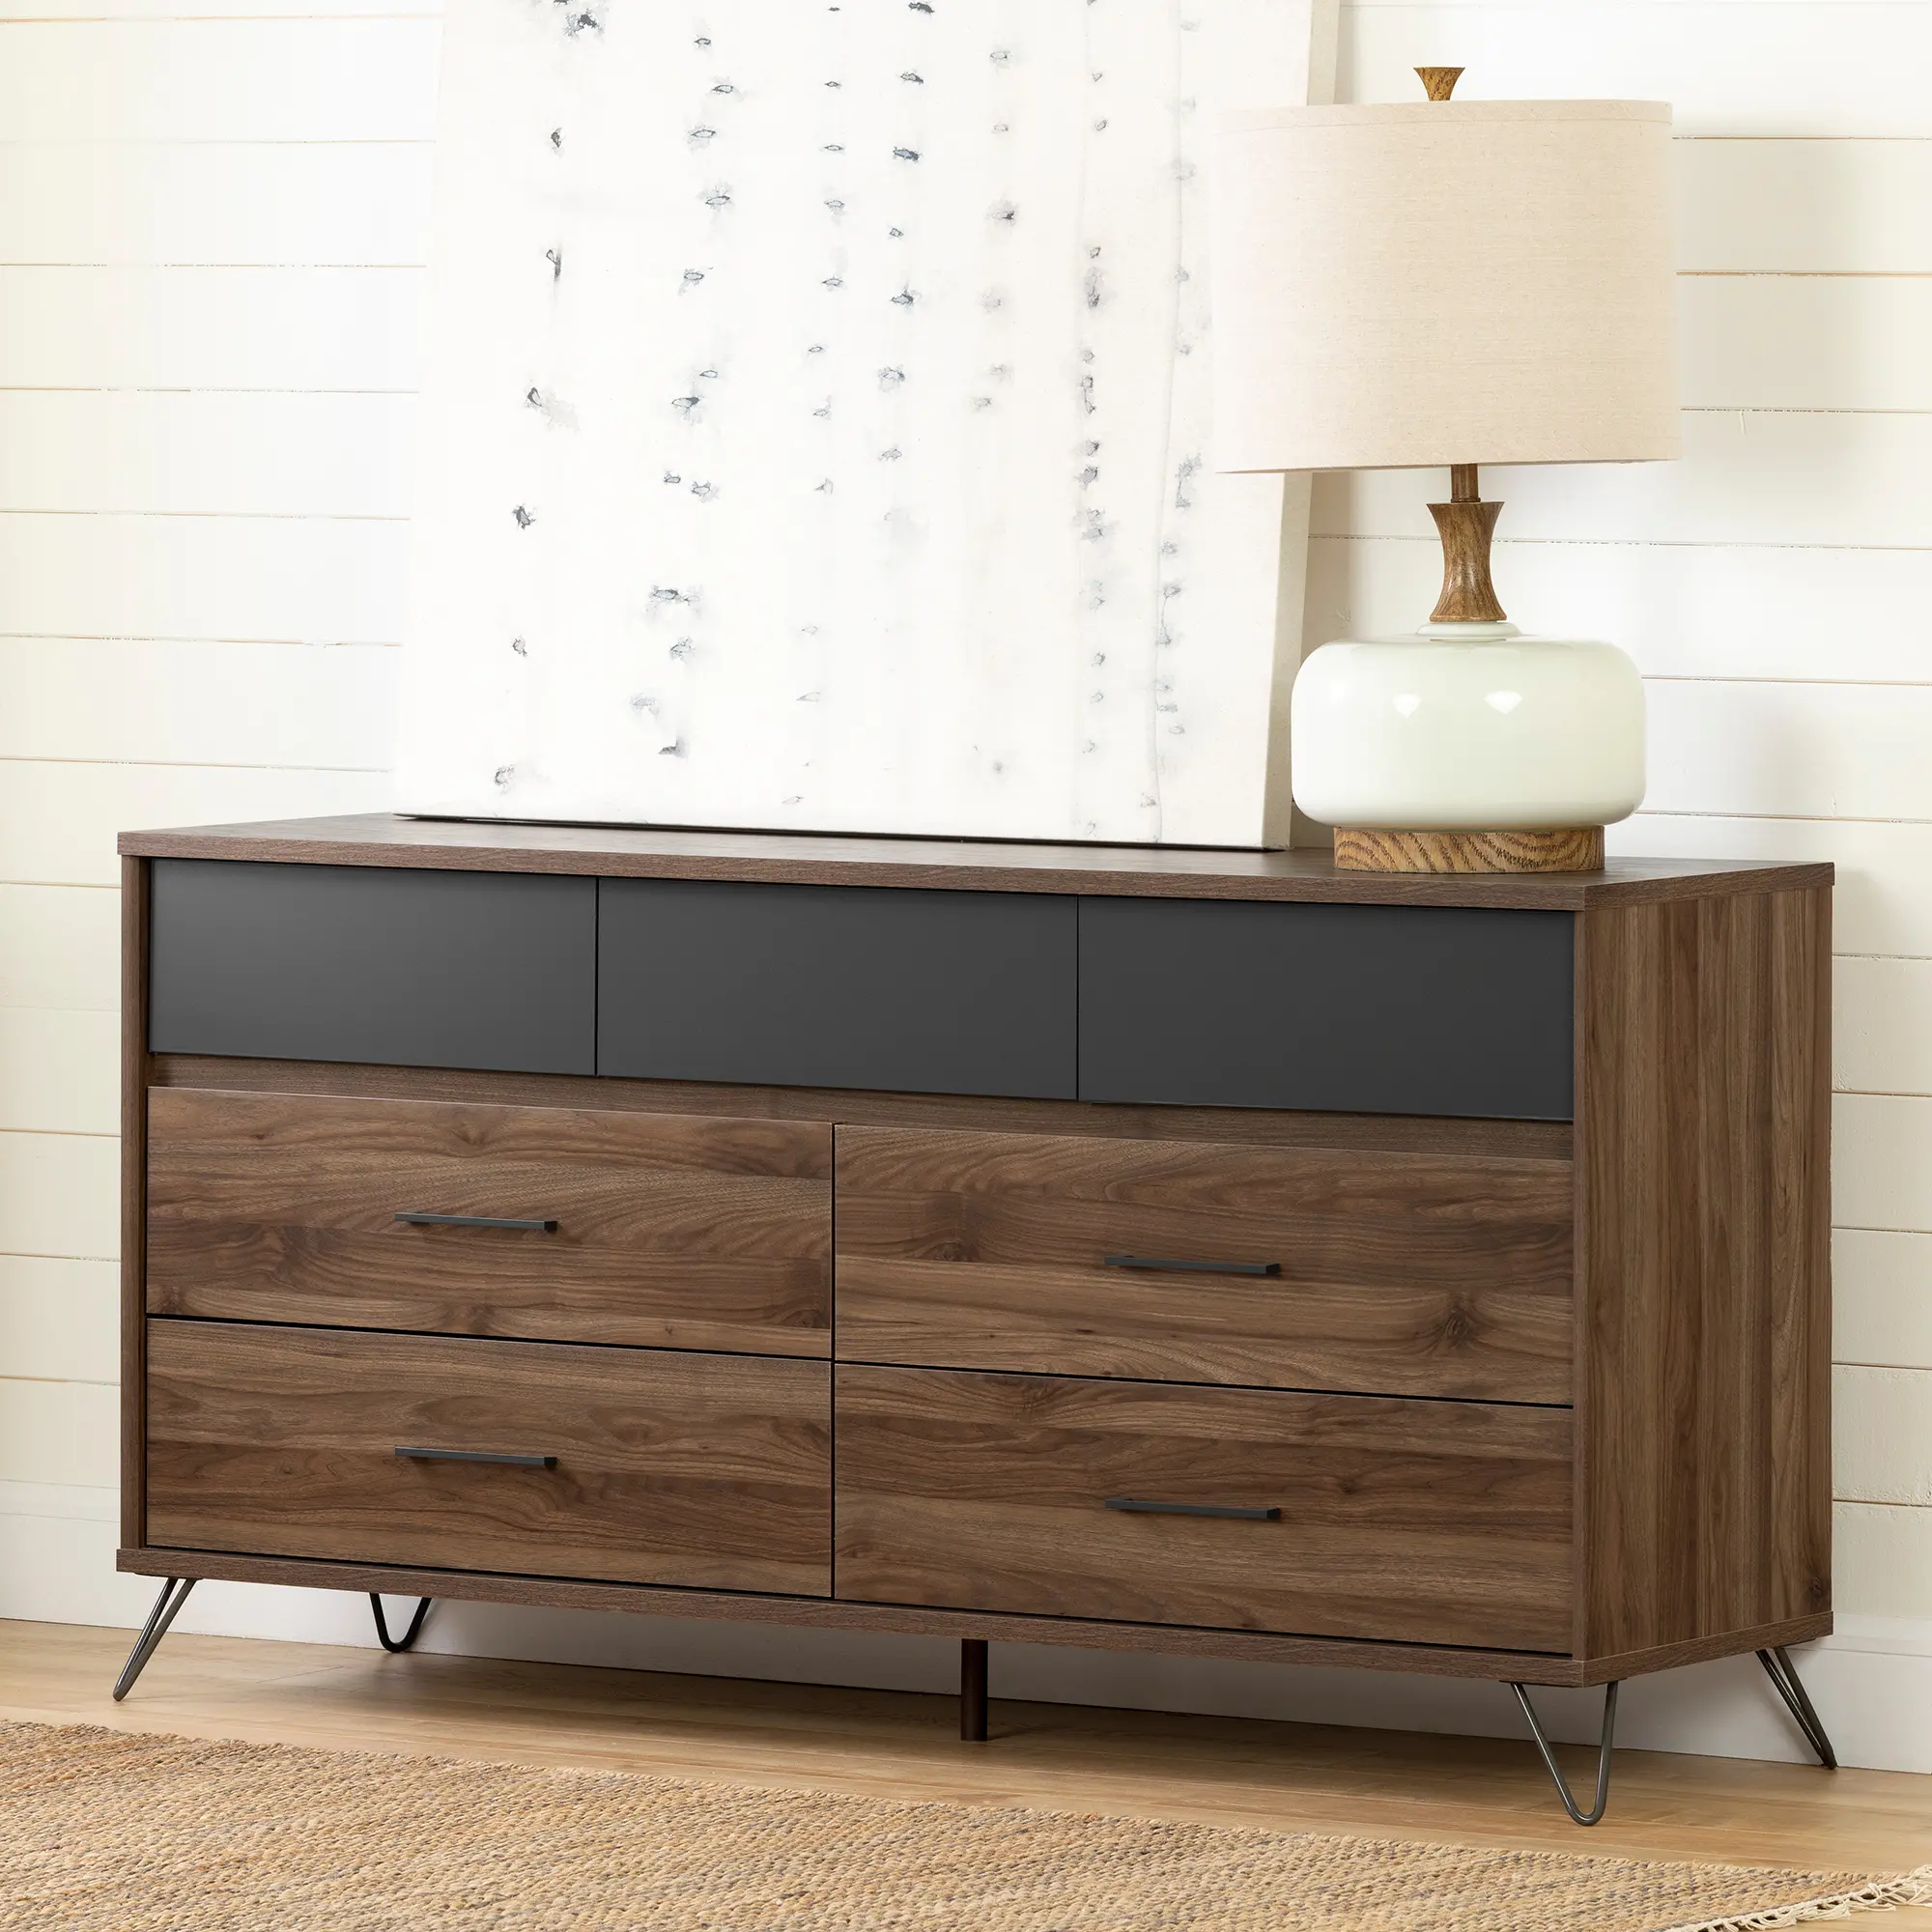 Olyn Modern Walnut and Charcoal Dresser - South Shore